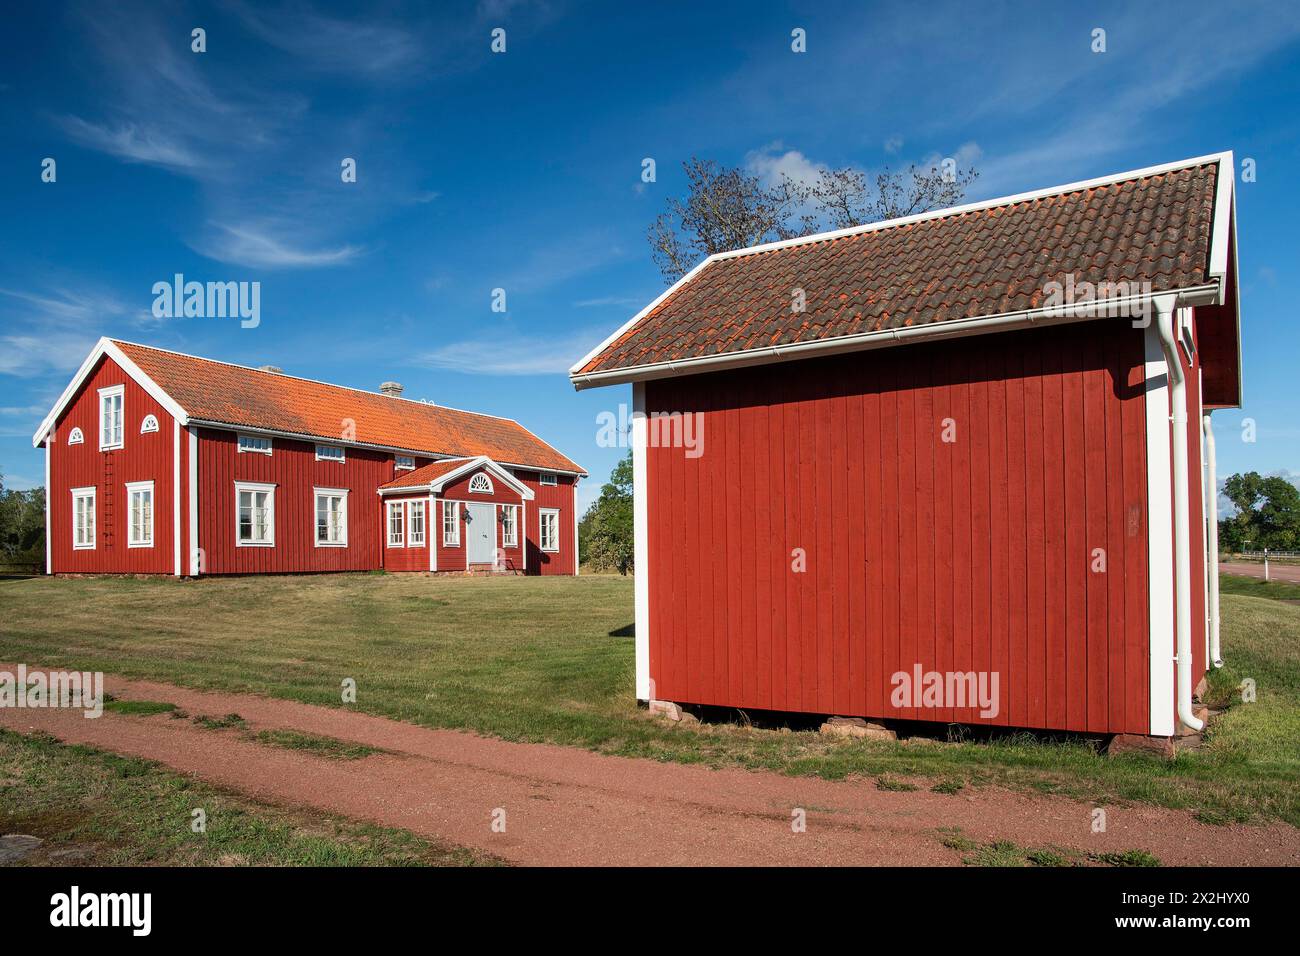 Falun red or Swedish red painted houses, farm, Geta, Aland, or Aland Islands, Gulf of Bothnia, Baltic Sea, Finland Stock Photo